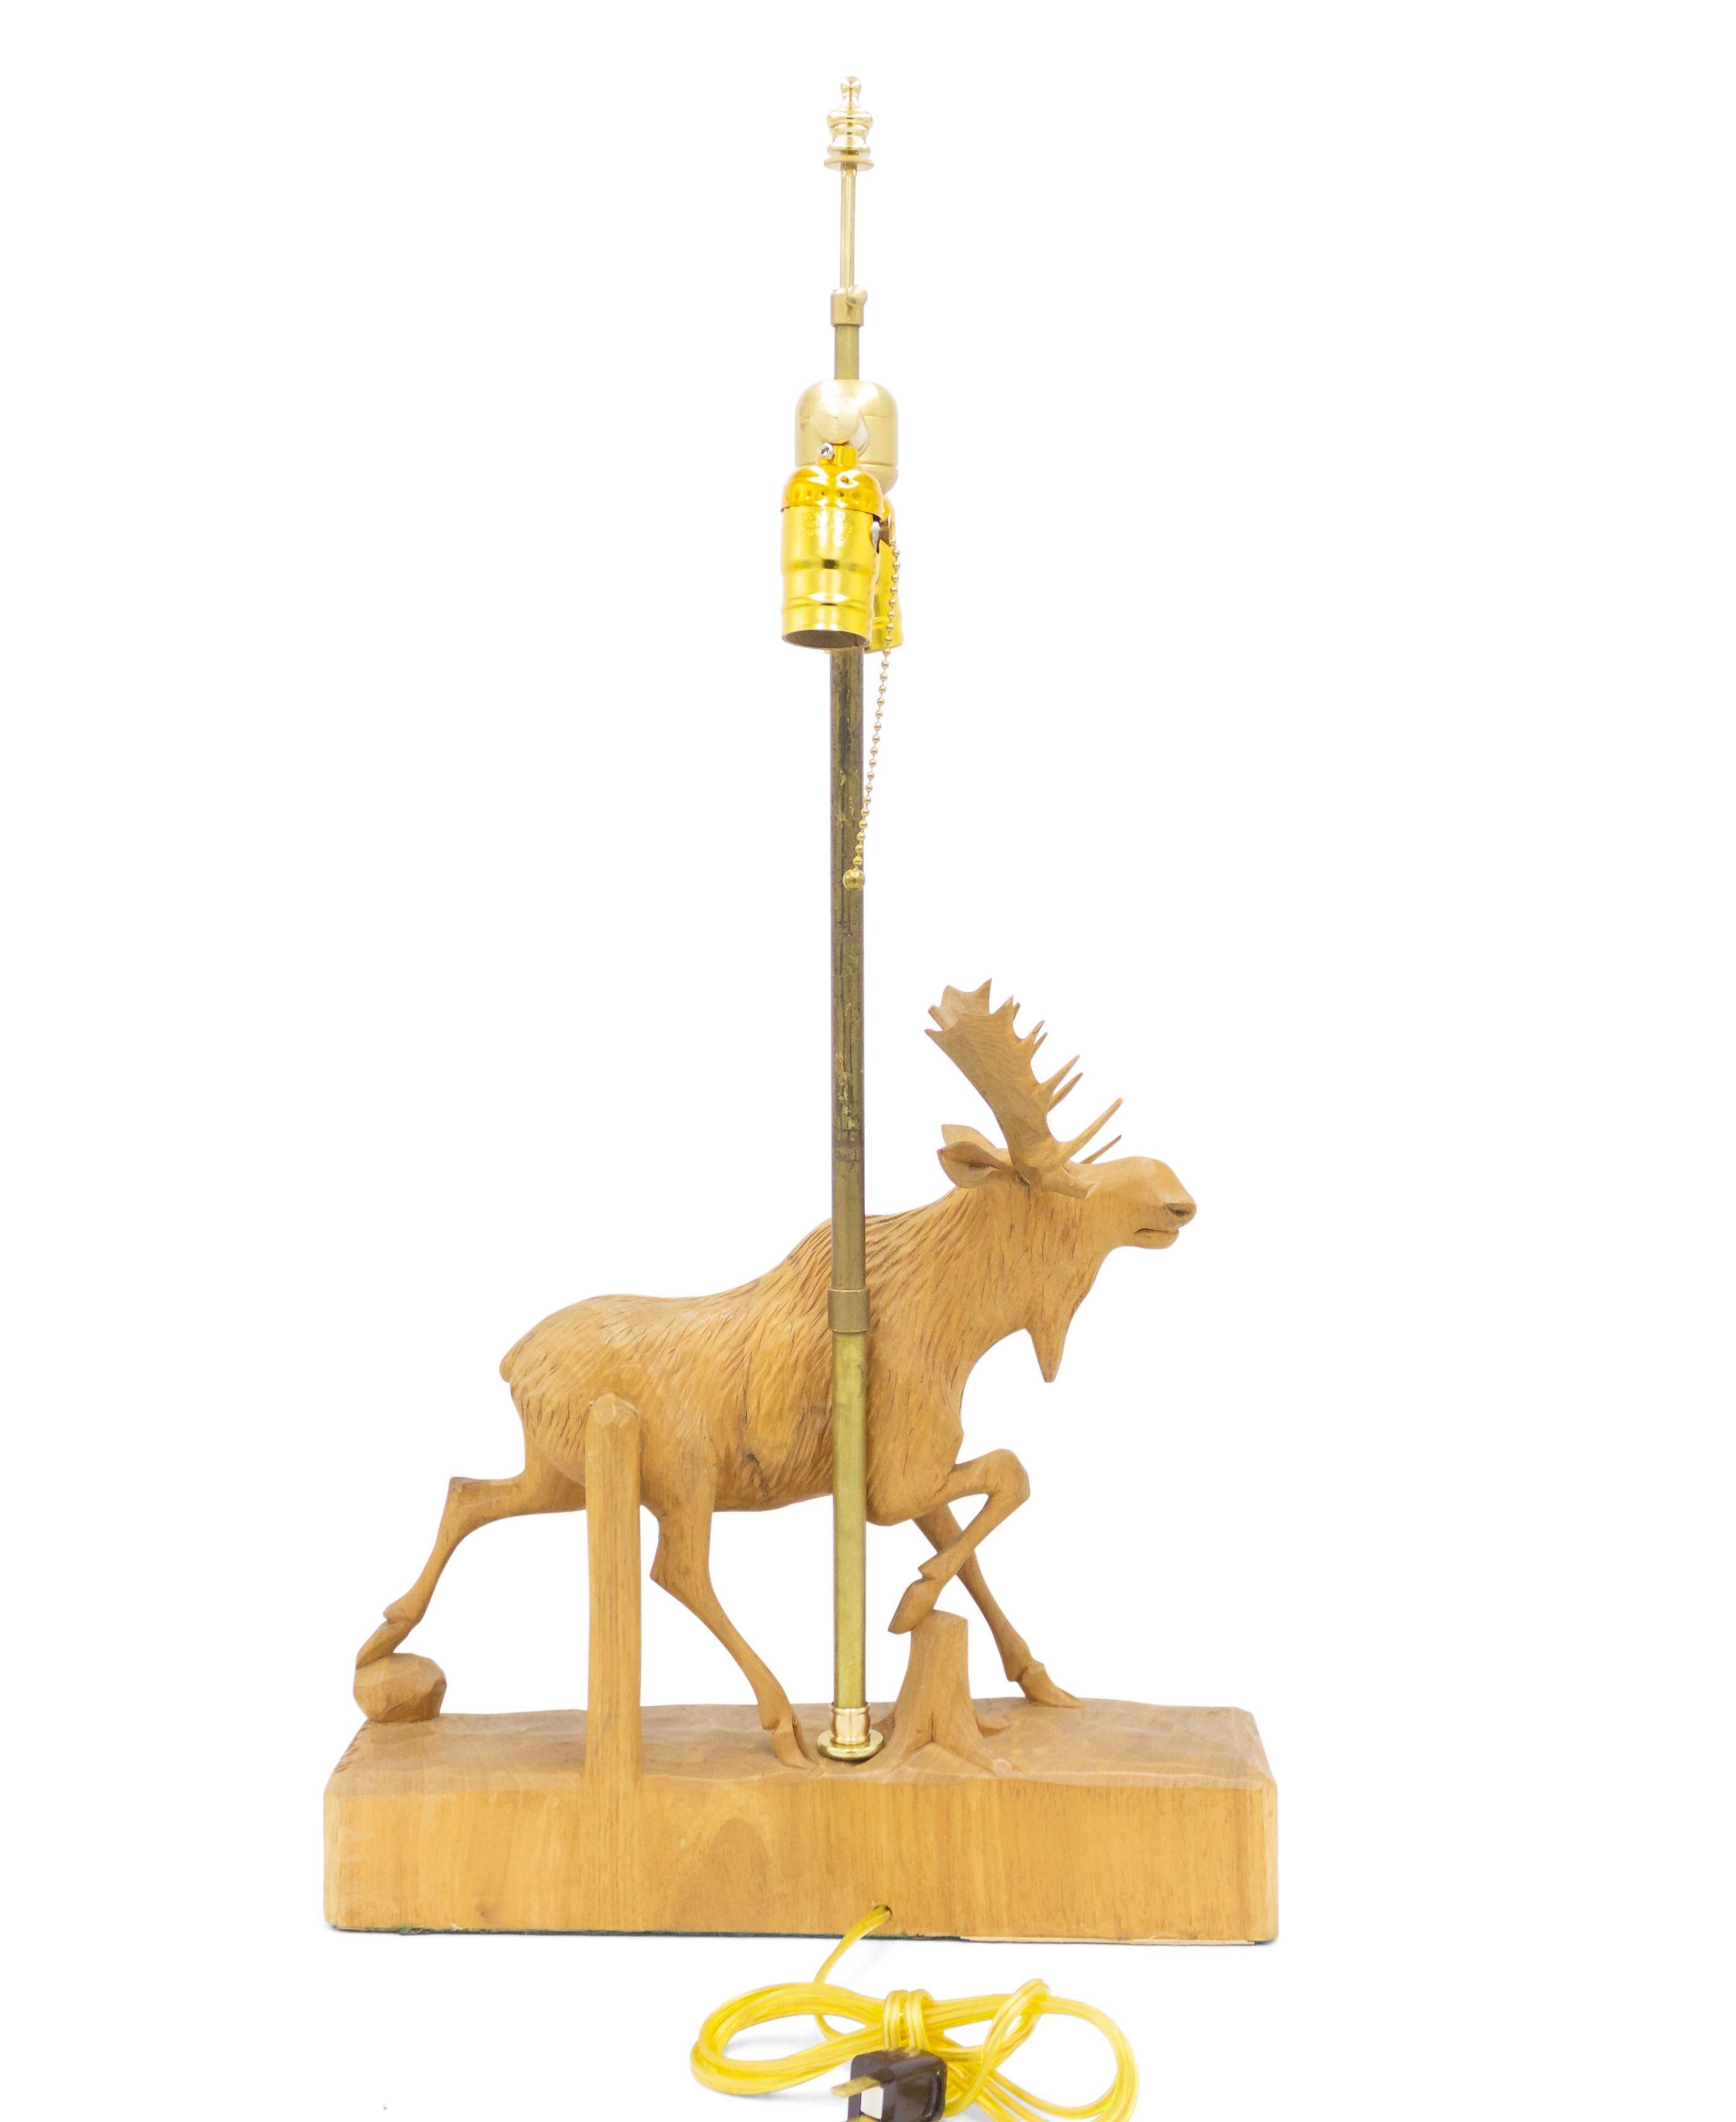 Rustic Adirondack style carved wooden figure of a moose mounted as a table lamp on a rectangular base (signed: Andre Dube).